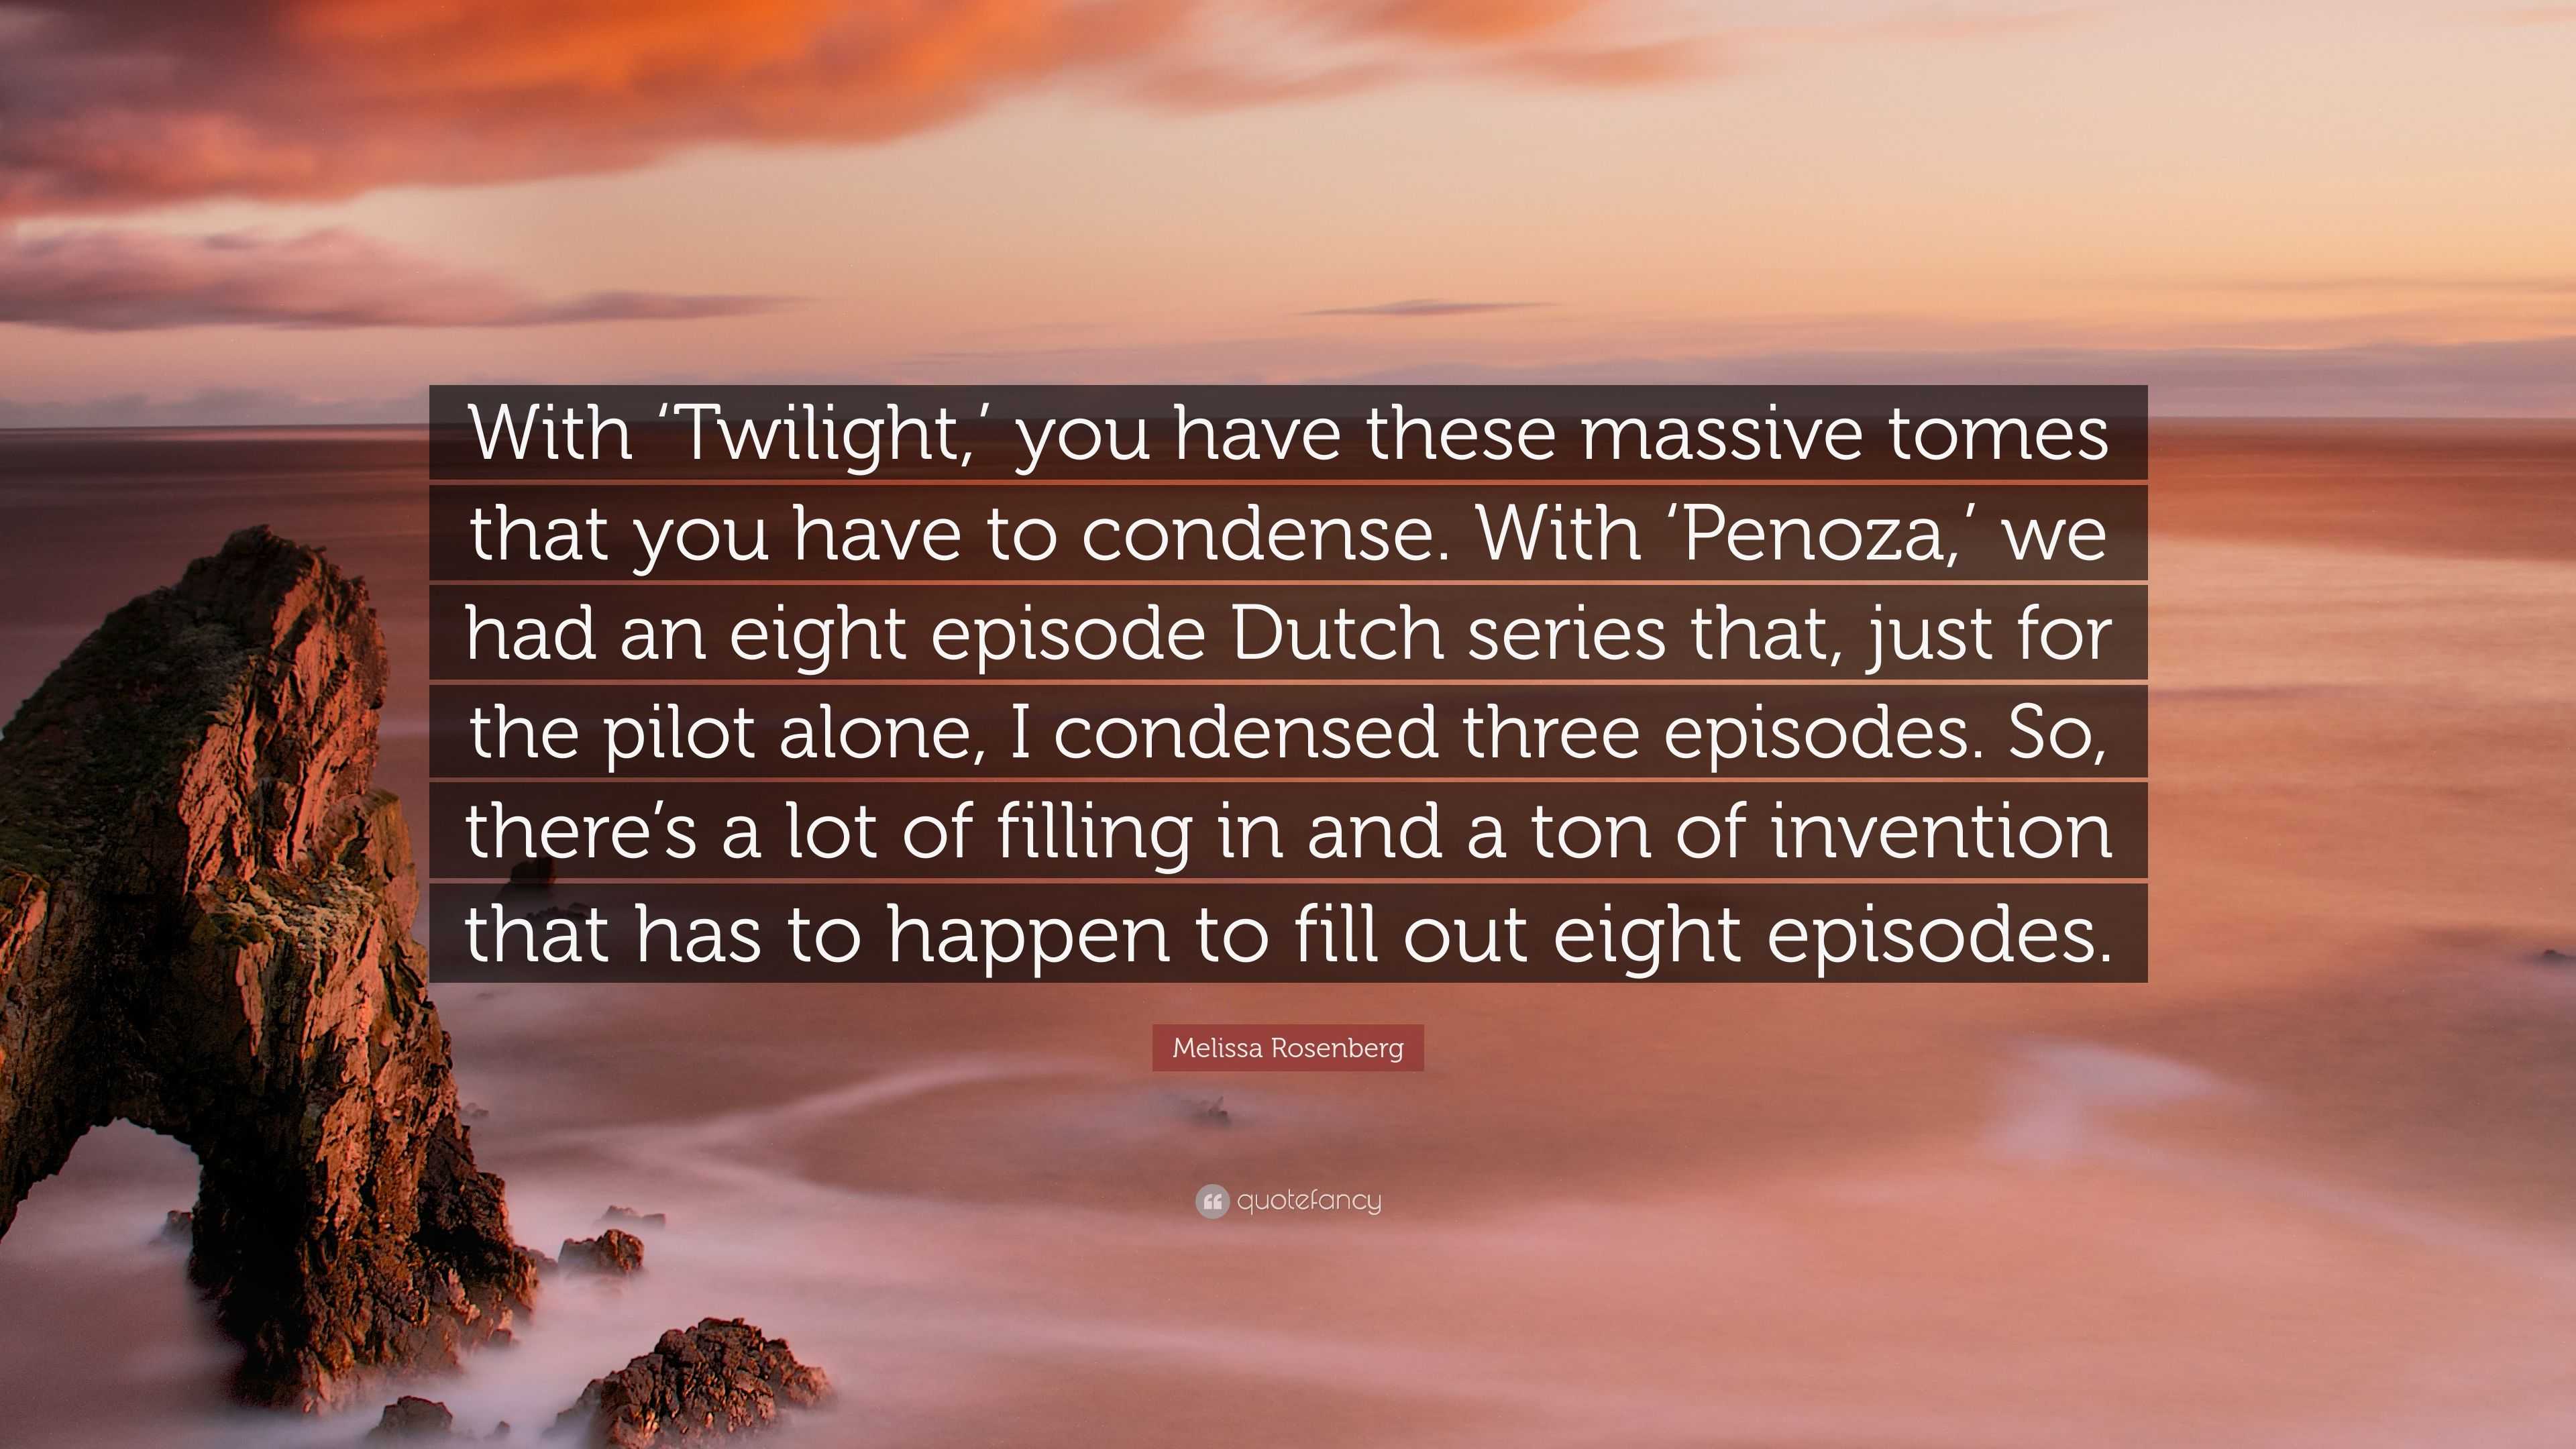 Melissa Rosenberg Quote: “With 'Twilight,' you have these massive tomes  that you have to condense. With 'Penoza,' we had an eight episode Dutch  se...”